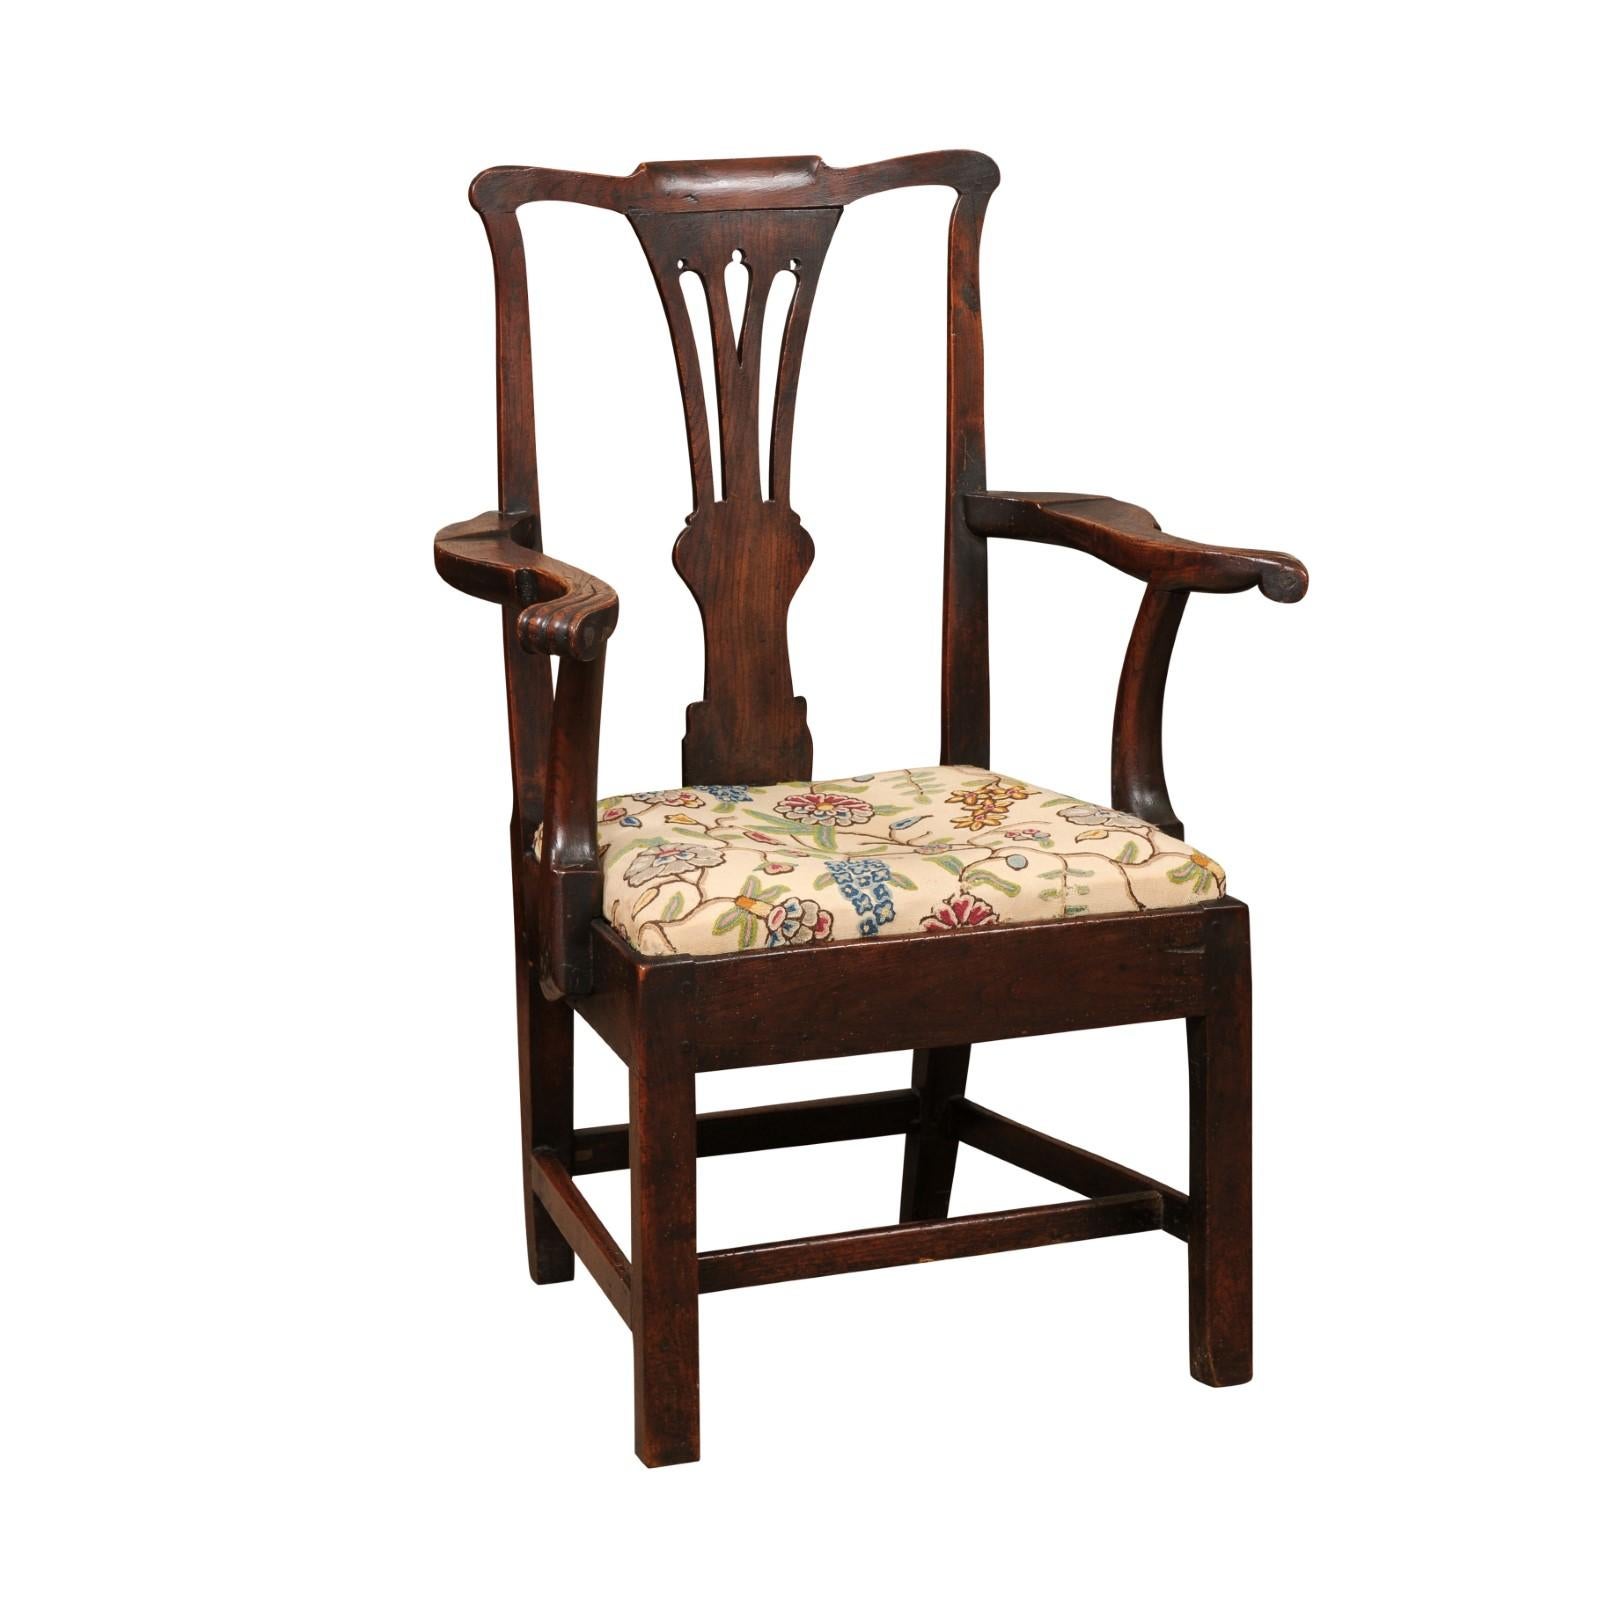 Large 18th Century English George III Armchair in Elm with Crewel Work Slip Seat For Sale 5